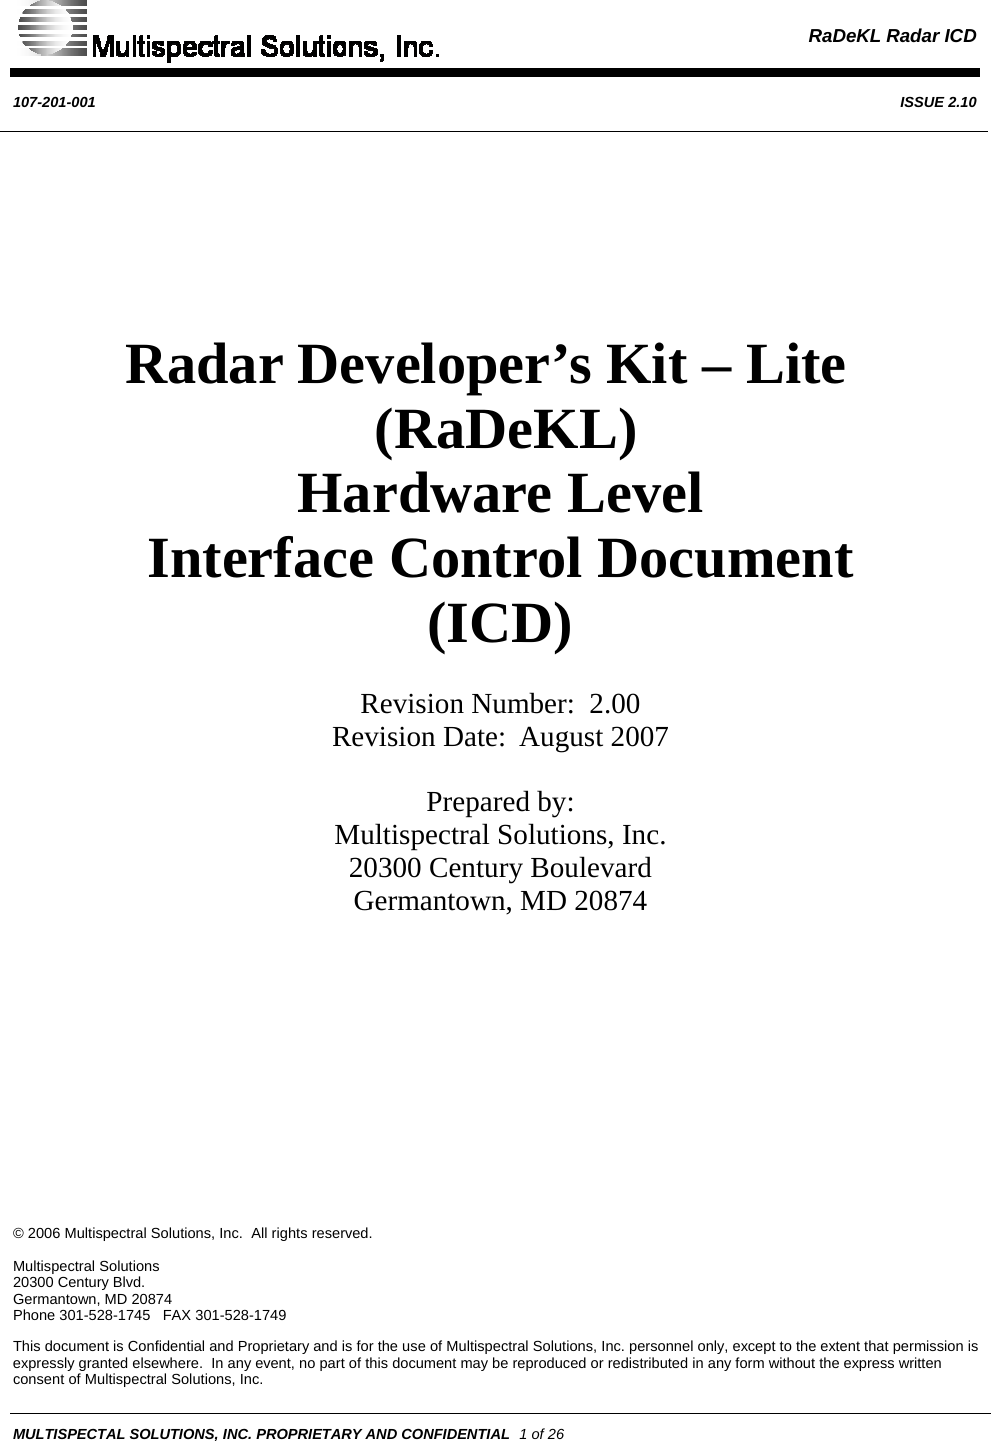  RaDeKL Radar ICD  107-201-001  ISSUE 2.10  © 2006 Multispectral Solutions, Inc.  All rights reserved.  Multispectral Solutions 20300 Century Blvd. Germantown, MD 20874 Phone 301-528-1745   FAX 301-528-1749 This document is Confidential and Proprietary and is for the use of Multispectral Solutions, Inc. personnel only, except to the extent that permission is expressly granted elsewhere.  In any event, no part of this document may be reproduced or redistributed in any form without the express written consent of Multispectral Solutions, Inc. MULTISPECTAL SOLUTIONS, INC. PROPRIETARY AND CONFIDENTIAL  1 of 26       Radar Developer’s Kit – Lite    (RaDeKL)  Hardware Level Interface Control Document  (ICD)   Revision Number:  2.00 Revision Date:  August 2007   Prepared by: Multispectral Solutions, Inc. 20300 Century Boulevard Germantown, MD 20874           